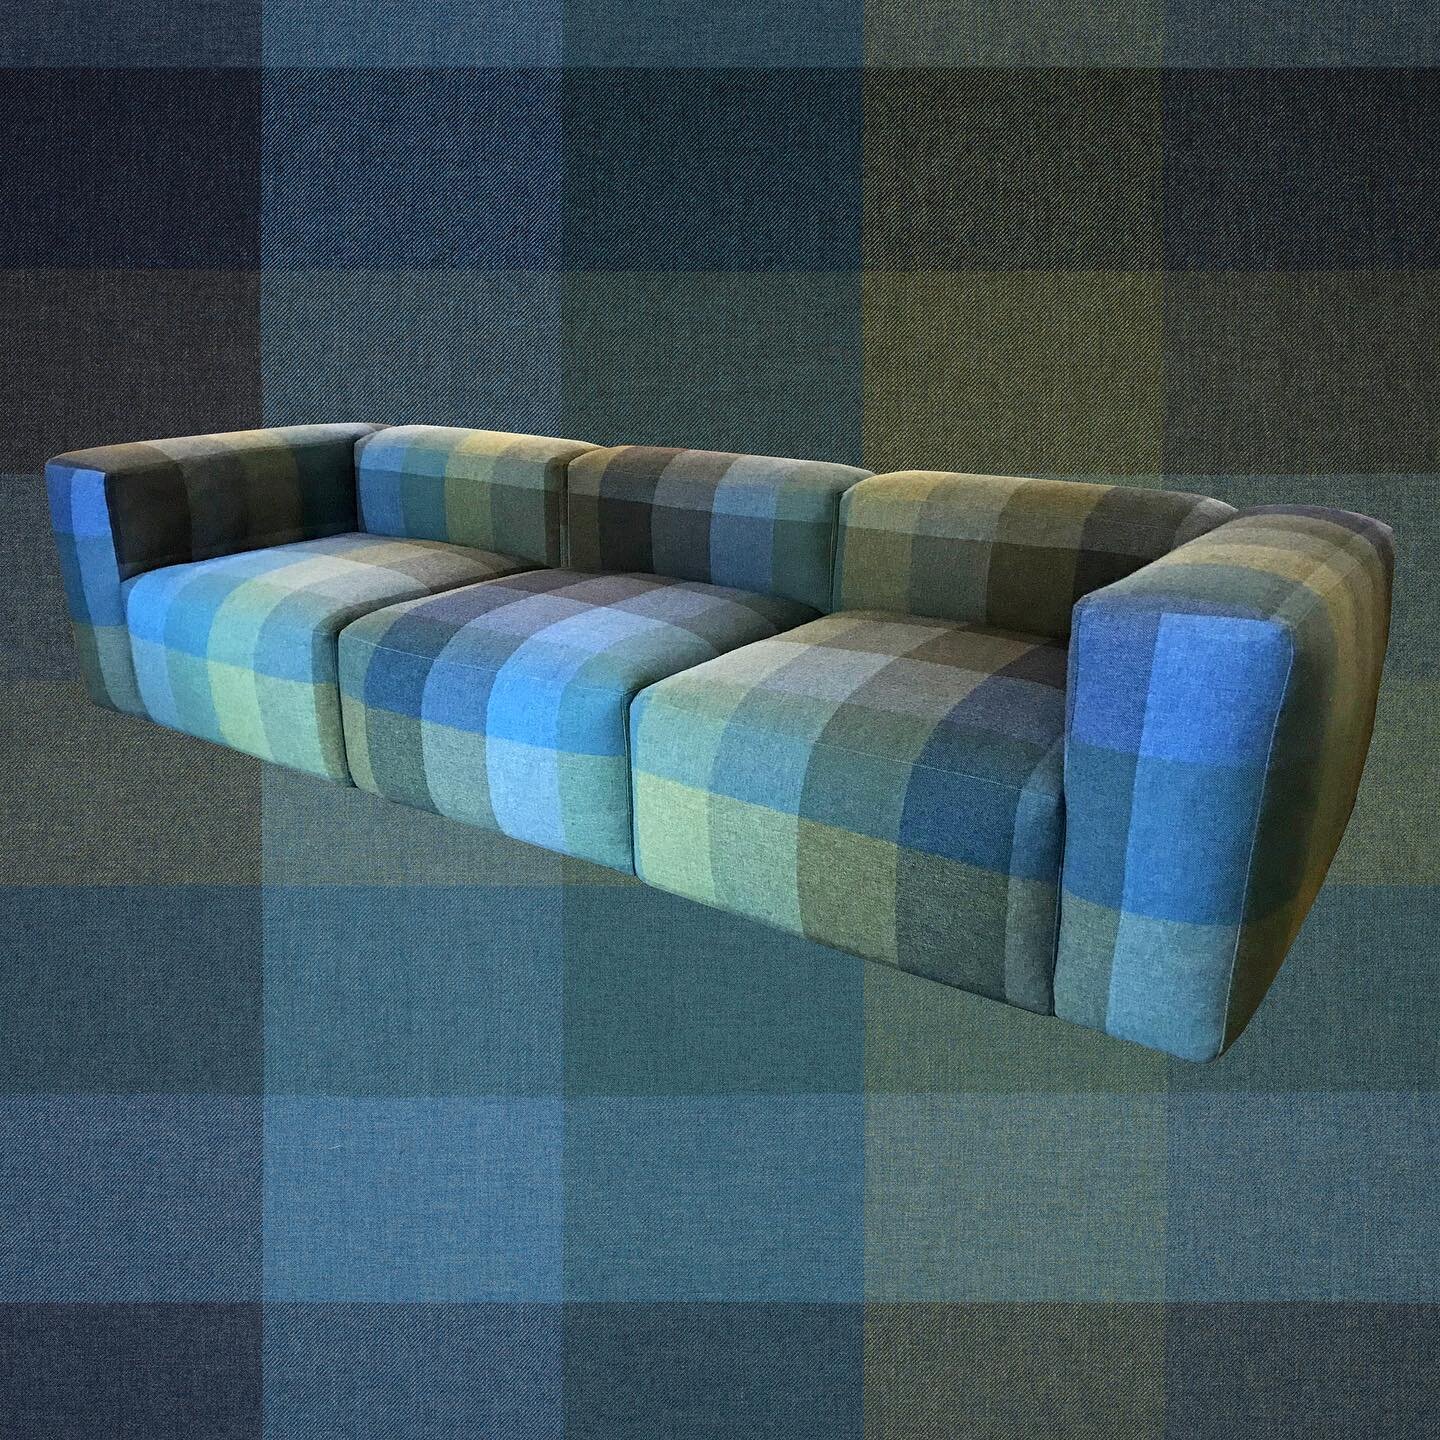 Greetings from the dreamscape! Truly a dream come true couch this one. A special client reached out to me about a beast of a project: reupholstering a matching sectional couch and loveseat from @haydesign in the most epic @maharamstudio Wool Check by